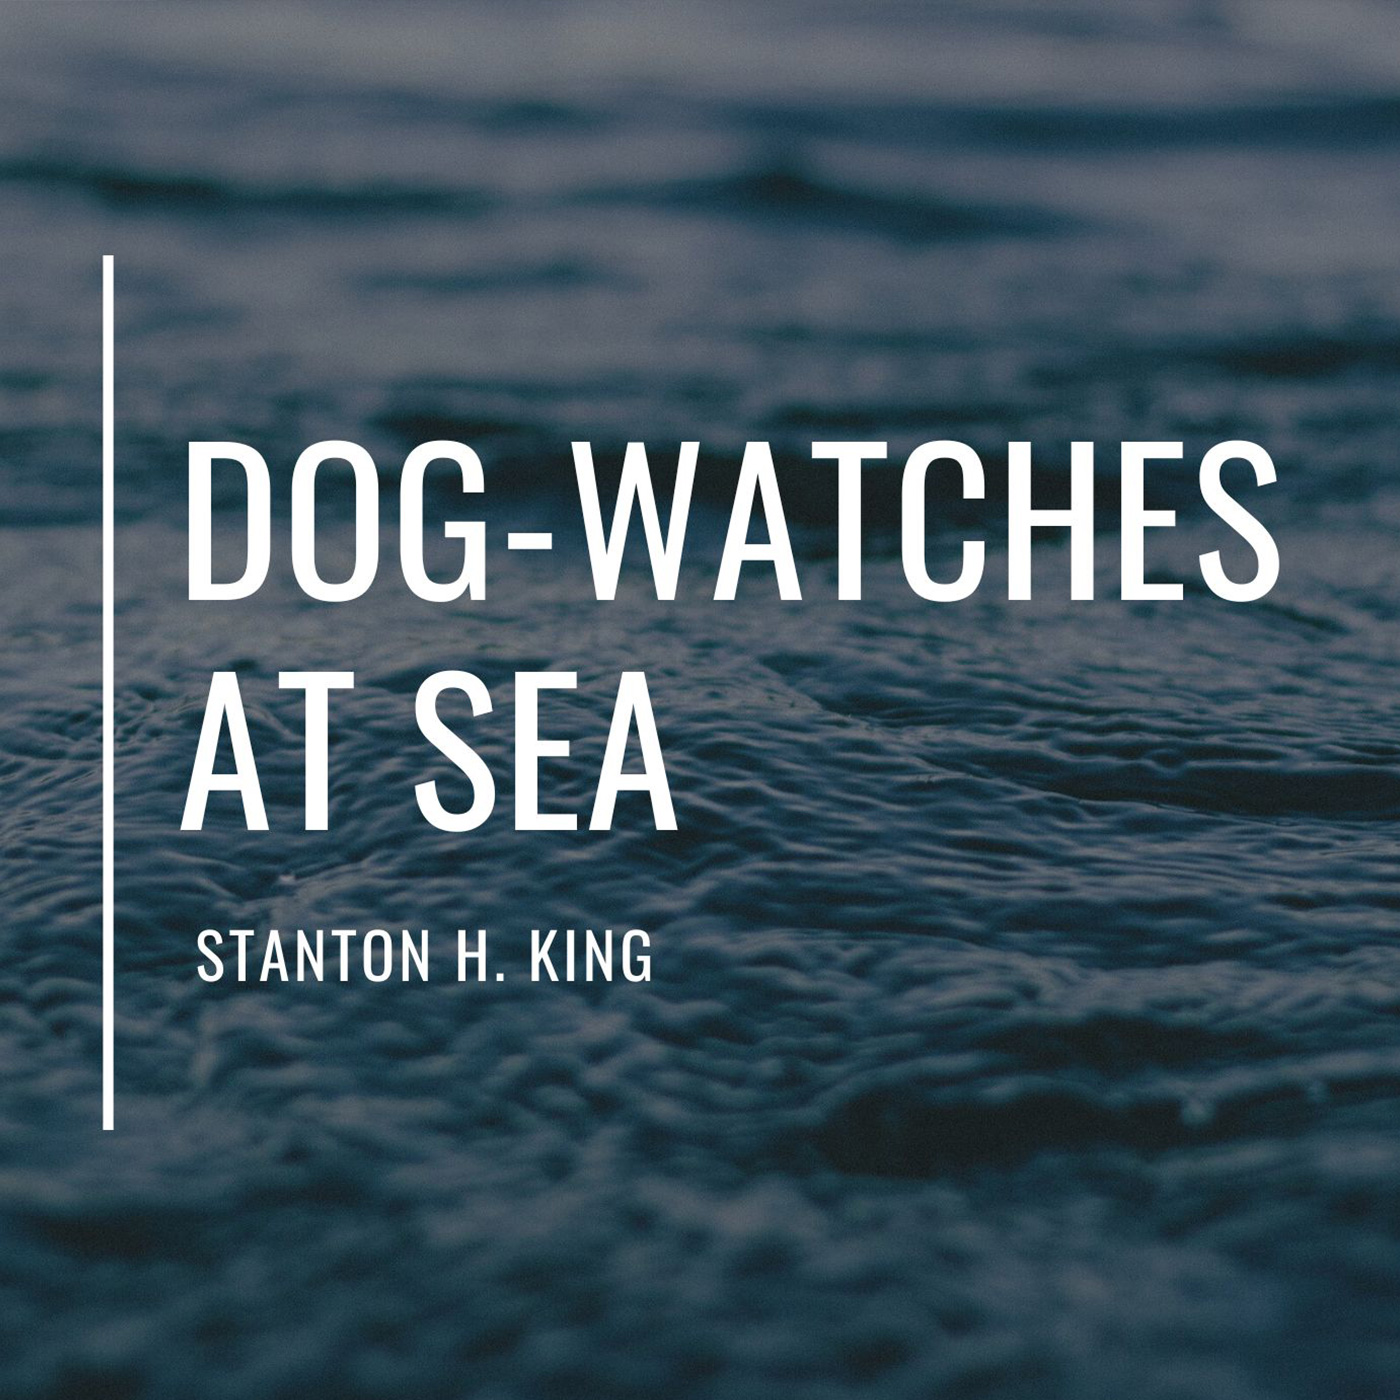 Dog-Watches at Sea by Stanton H. King